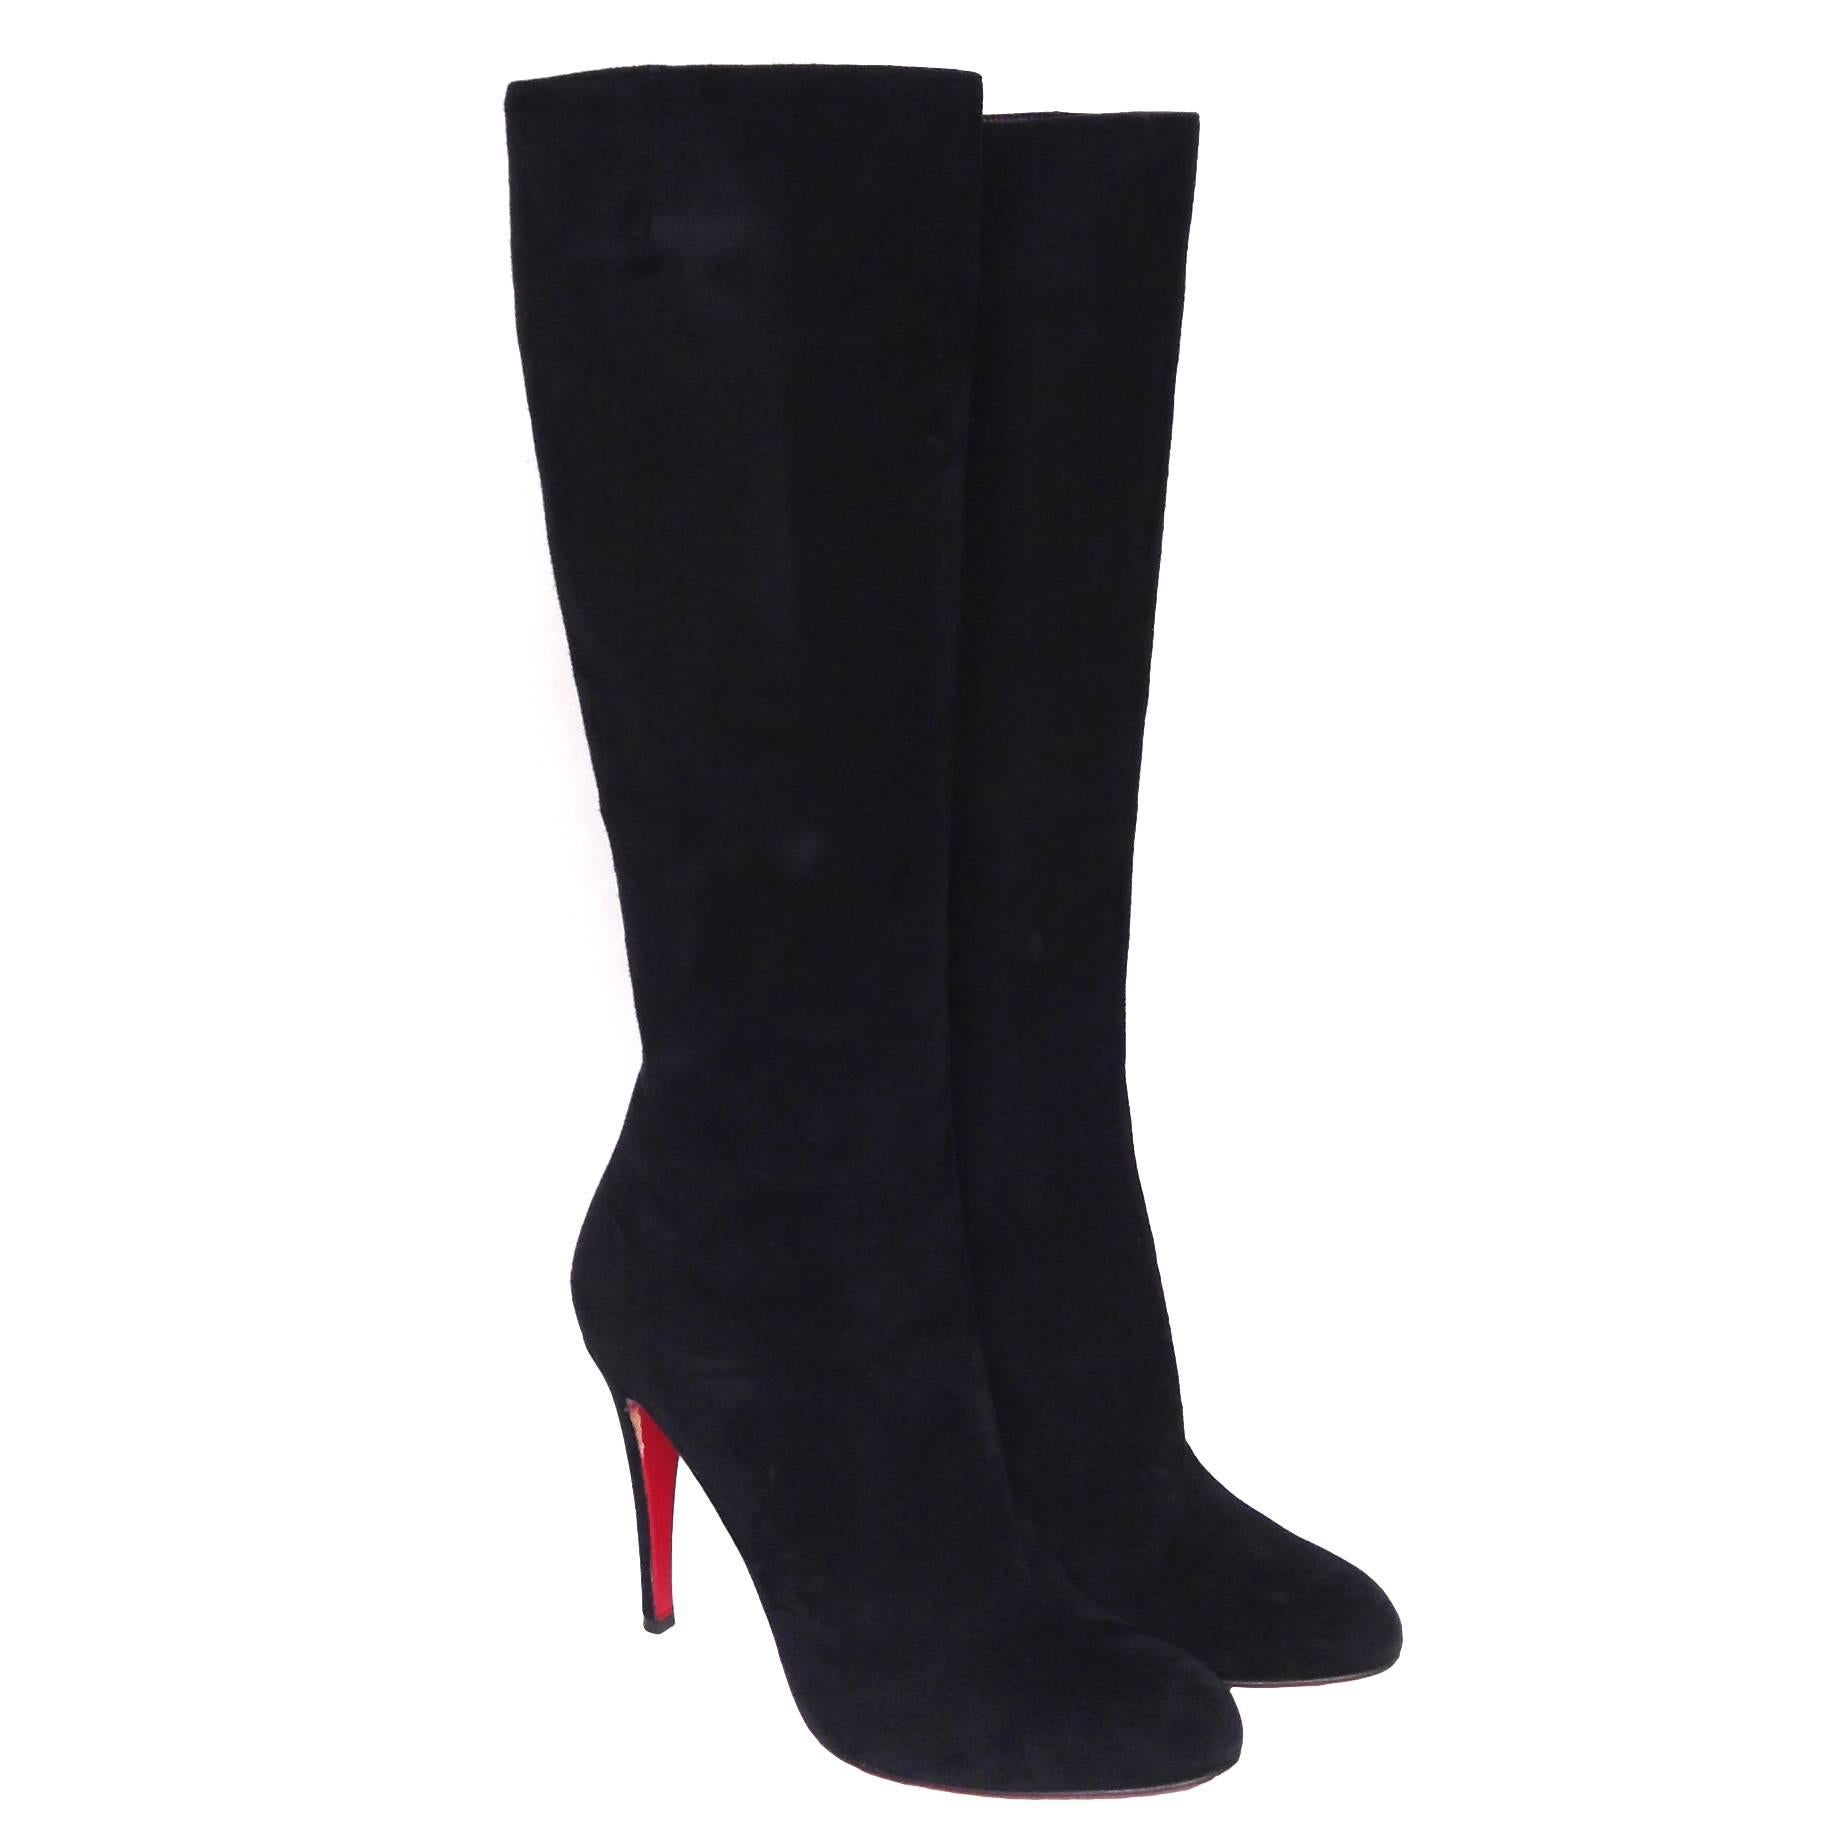 Christian Louboutin Suede Fifi Botta 85mm Boots Size 39.5 For Sale